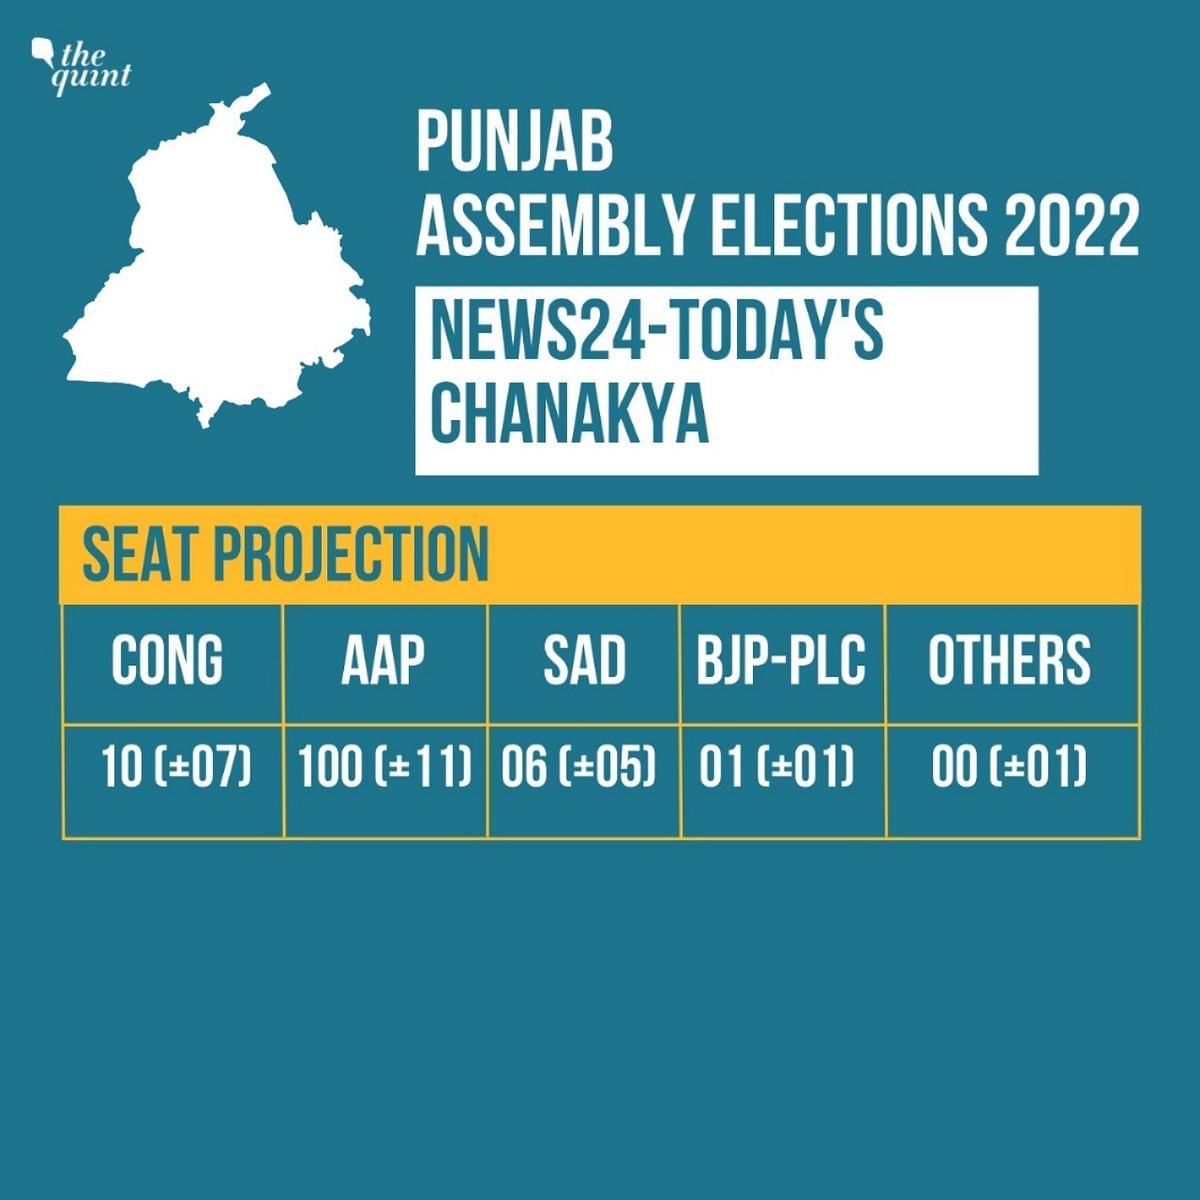 Catch all the live updates on the the exit poll results for Punjab Assembly Elections here.